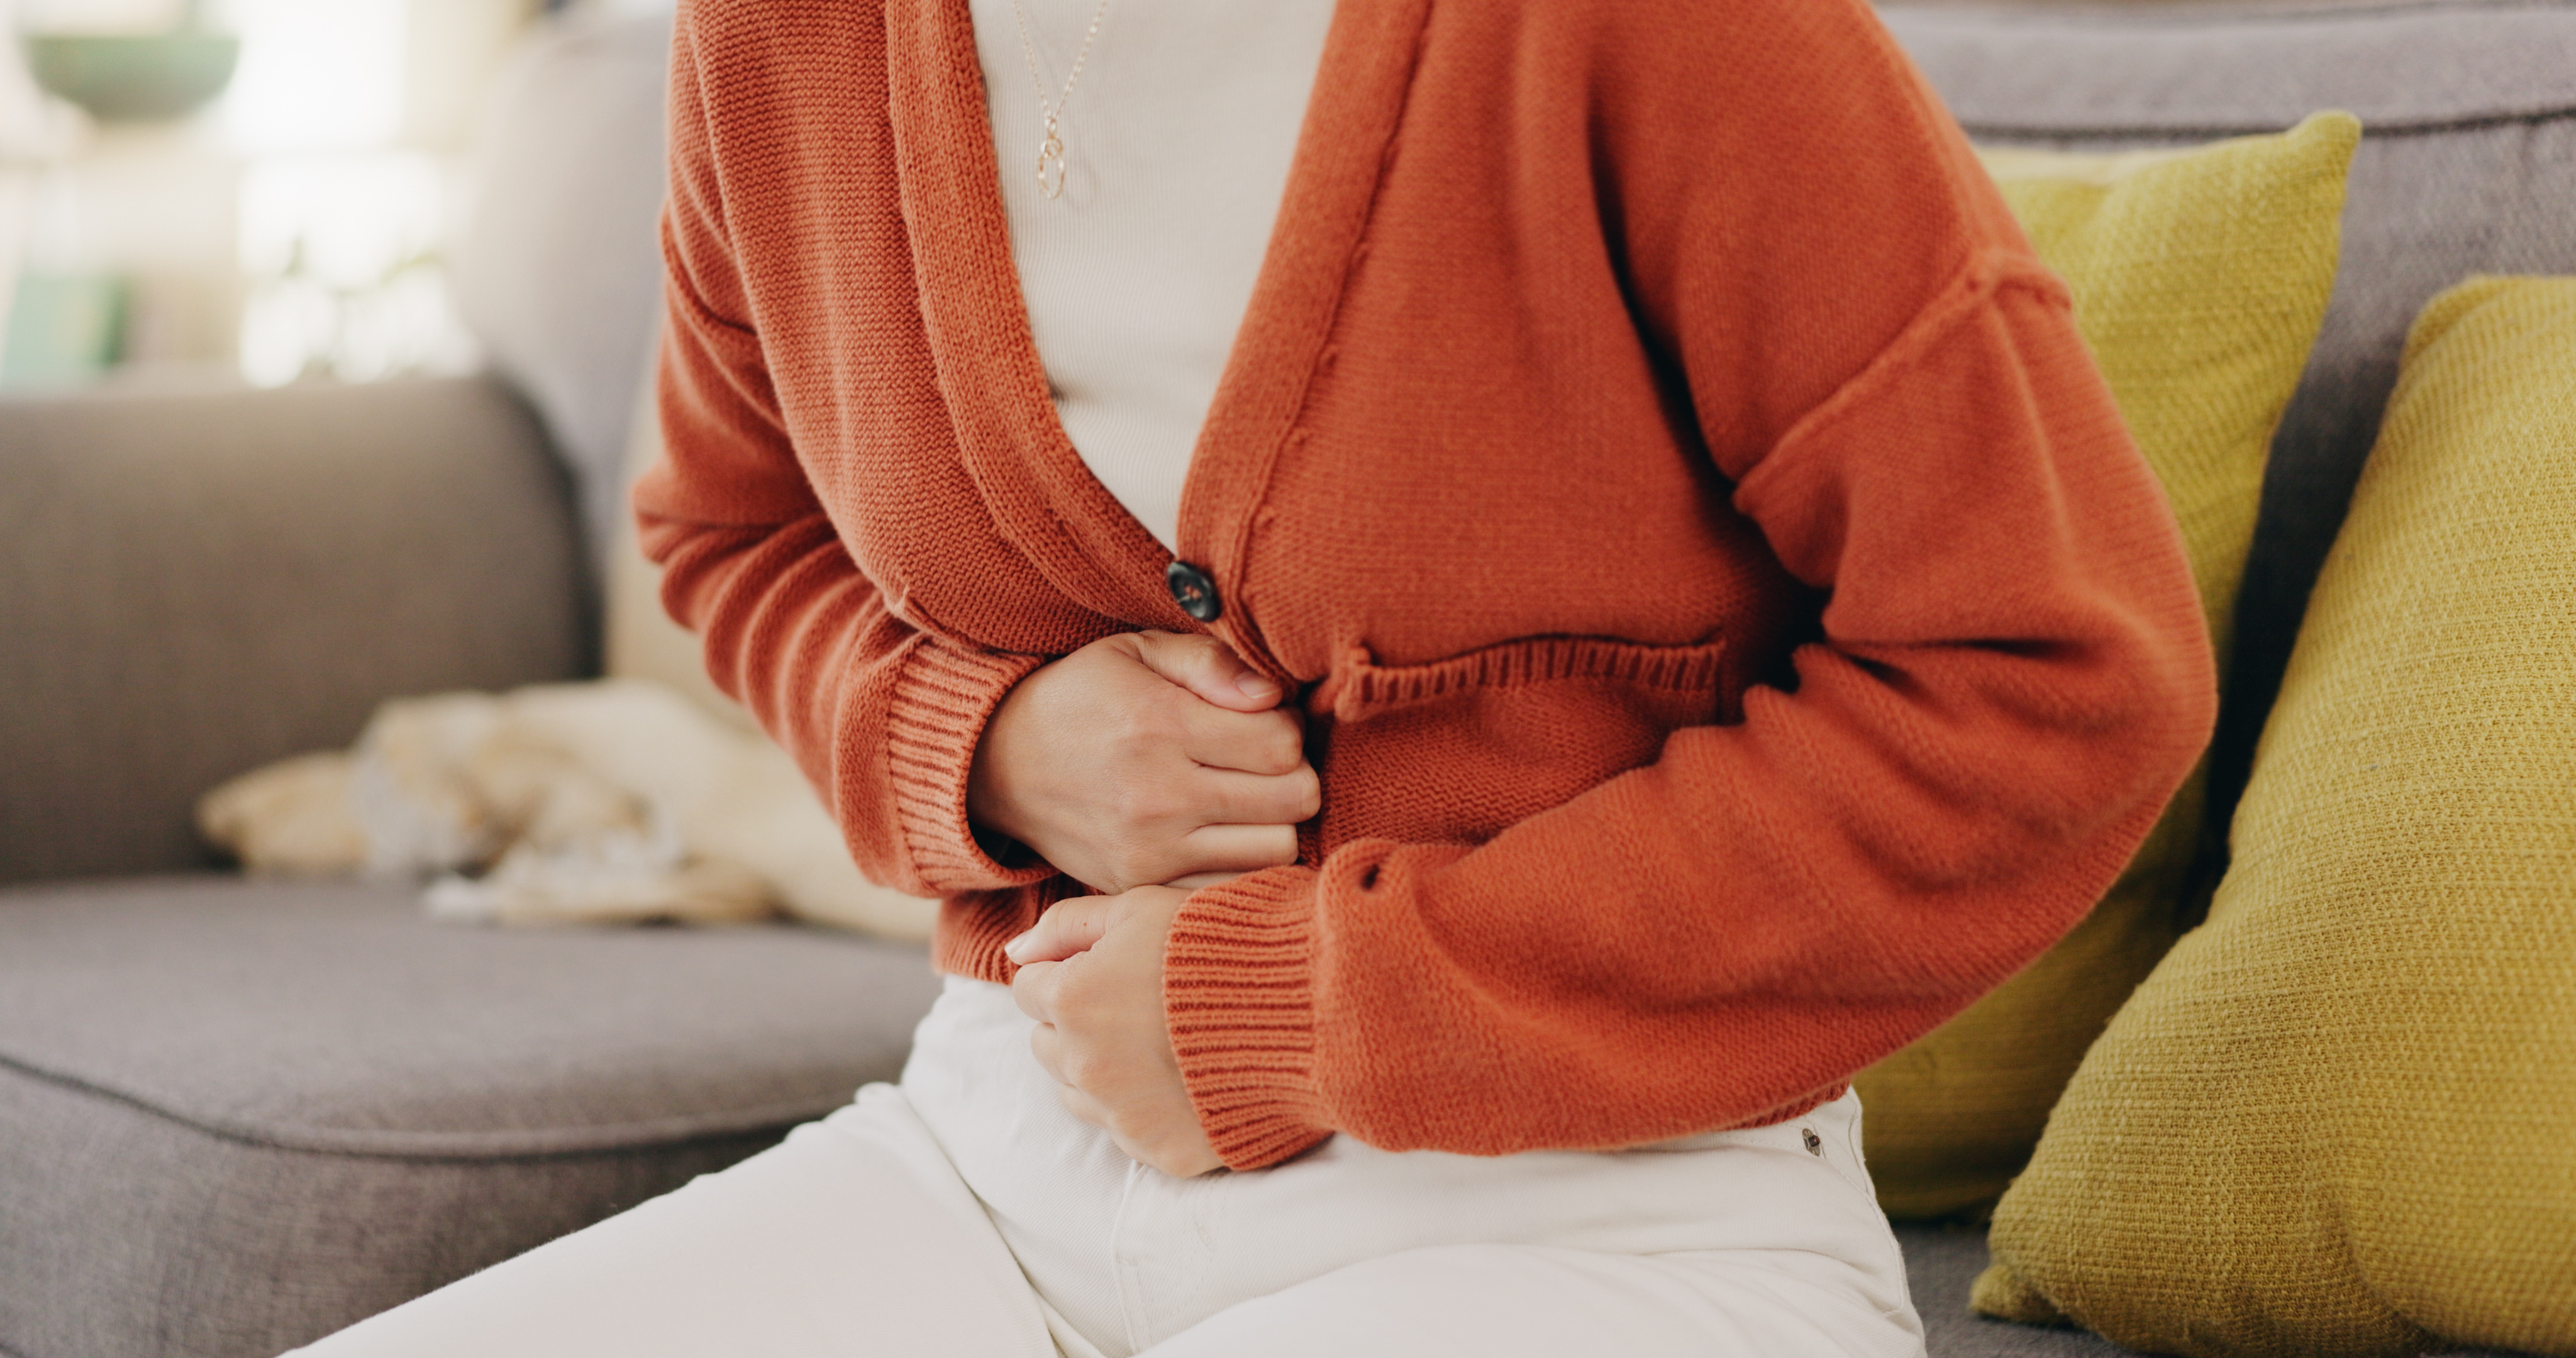 A woman experiencing stomach pain - learn how you can find relief with Vida-Flo's IV hydration treatment for gastrointestinal diseases in Hendersonville, TN.